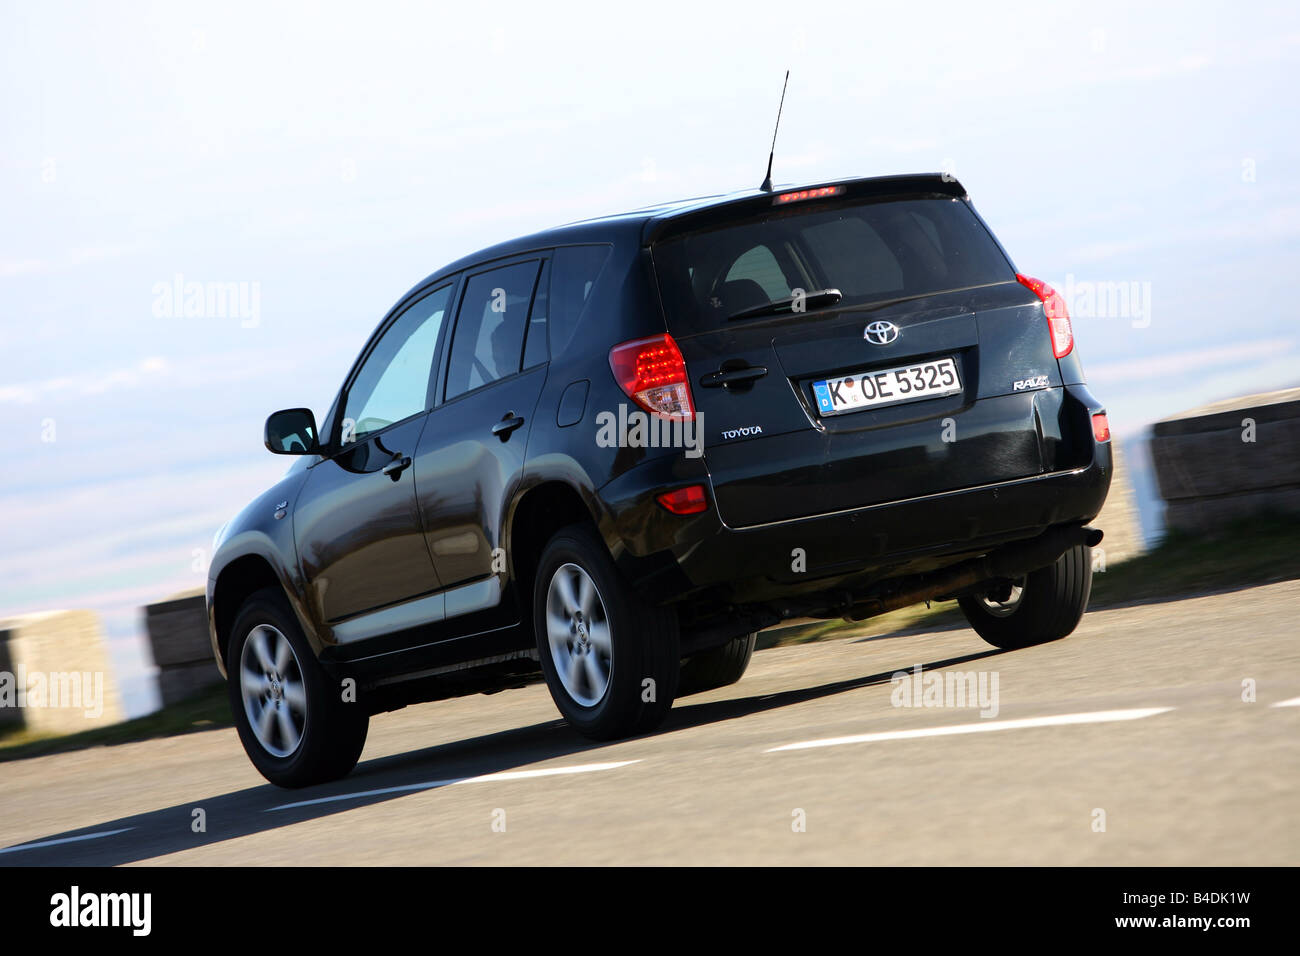 Toyota RAV4 2.2 D-4D Cross Sport, model year 2006-, black, driving, diagonal from the back, rear view, country road Stock Photo